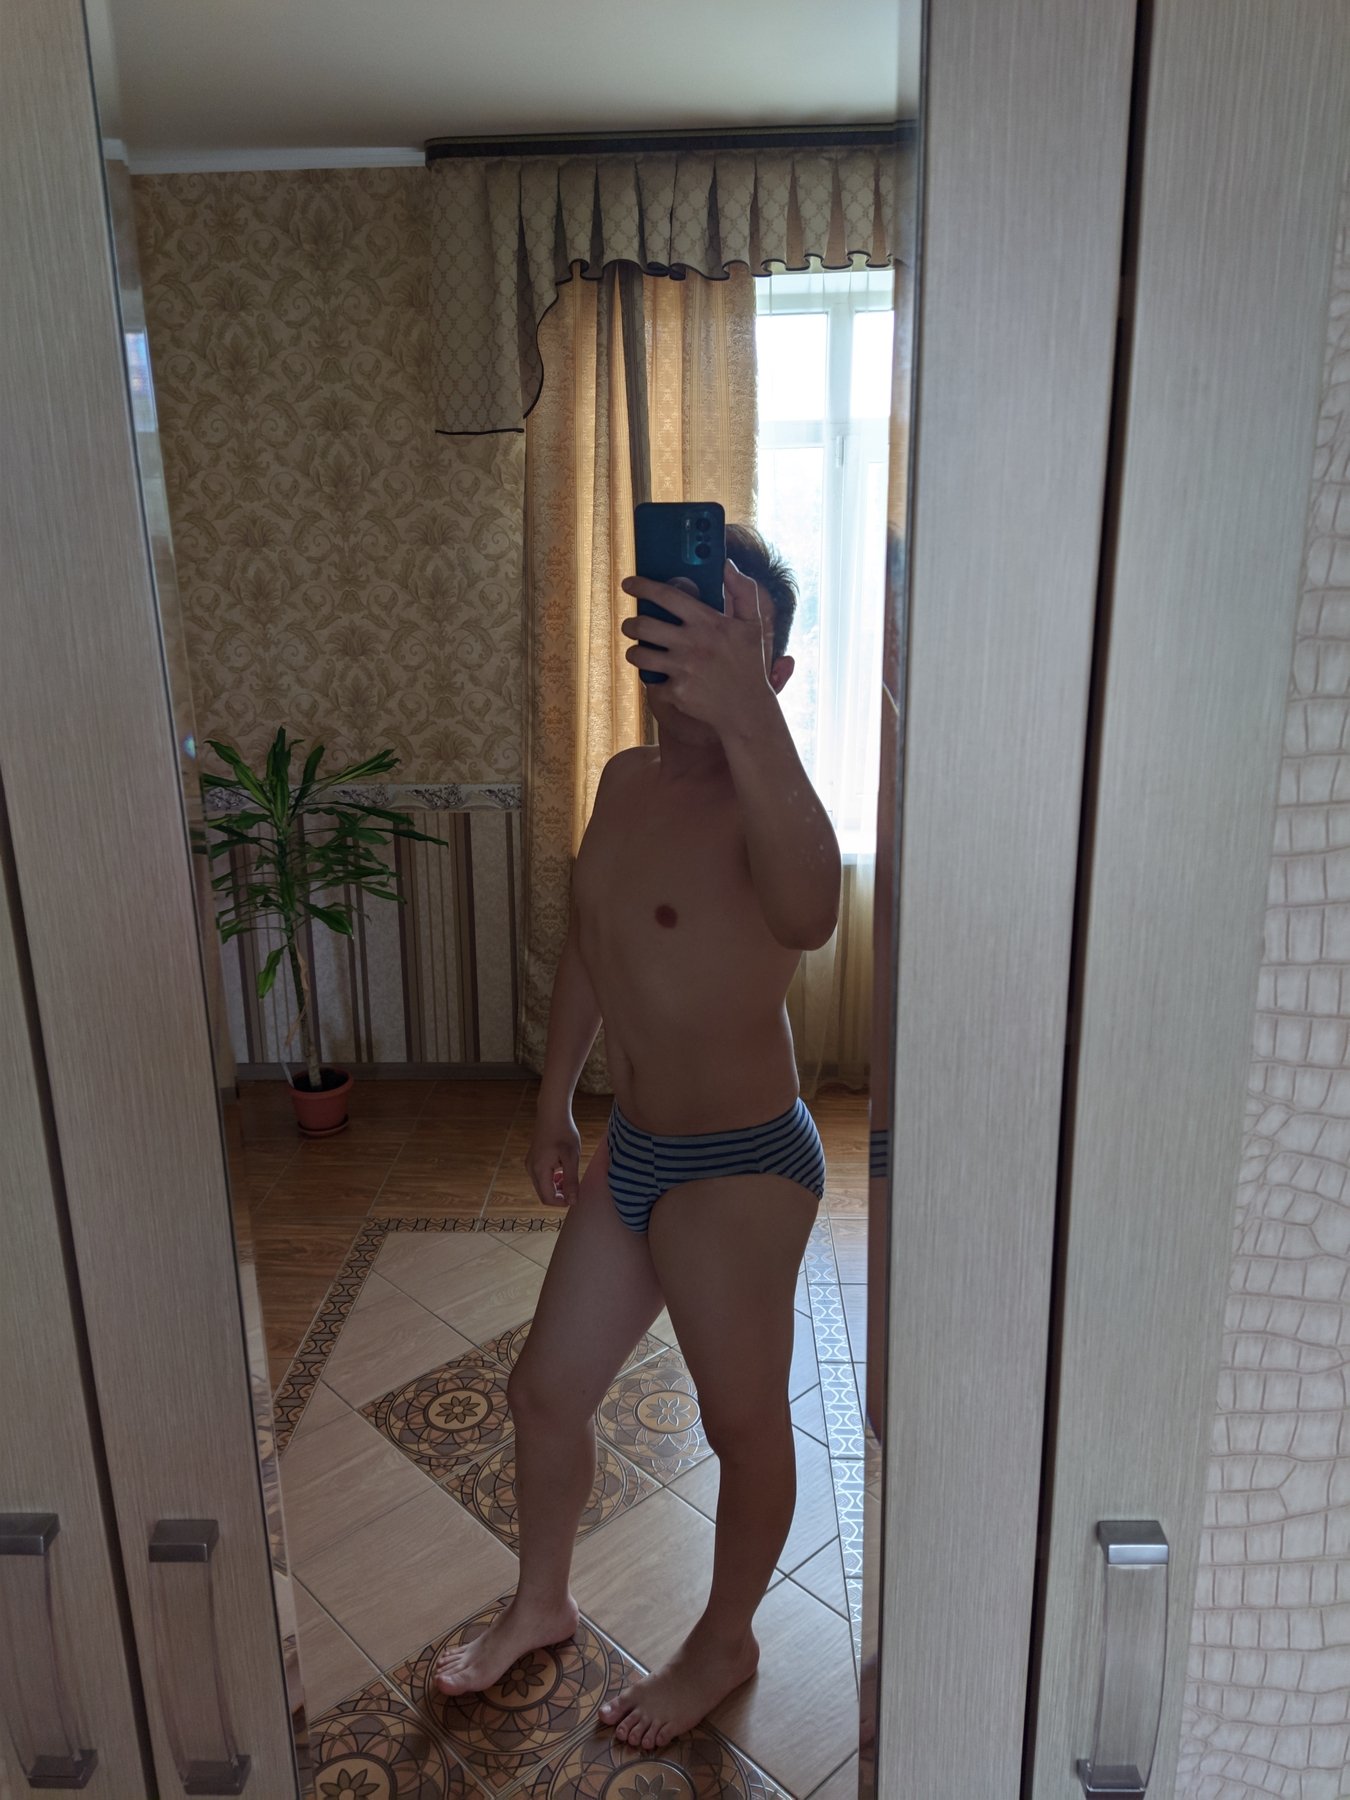 Male Escort Moscow